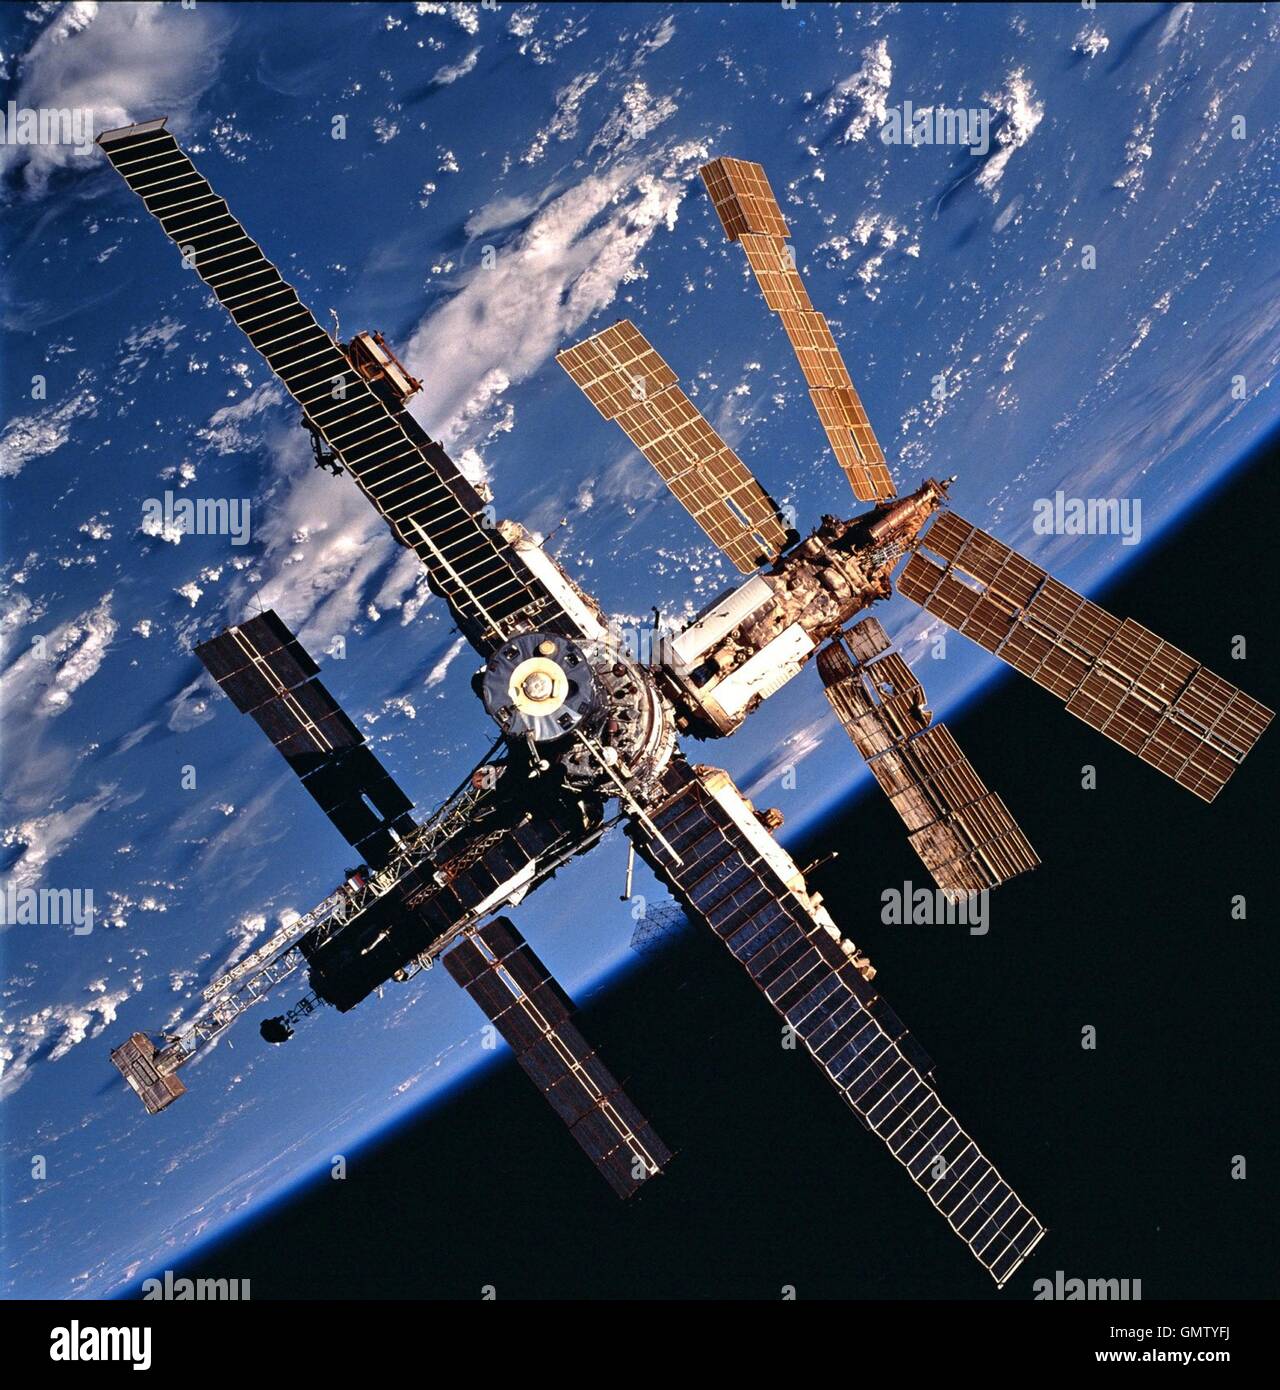 View of Russian Mir Space Station backdropped against a cloud-covered Earth was photographed during a fly-around by the Space Shuttle Atlantis following the conclusion of joint docking activities between the Mir-24 and STS-86 crews October 5, 1997. One of the solar array panels on the Spektr Module shows damage incurred during the impact of a Russian unmanned Progress re-supply ship which collided with the space station June 25, 1997. Mir is nearing the end of its existence as Russia plans to steer the craft out of orbit in late February 2001 in a controlled crash to dump the space station saf Stock Photo